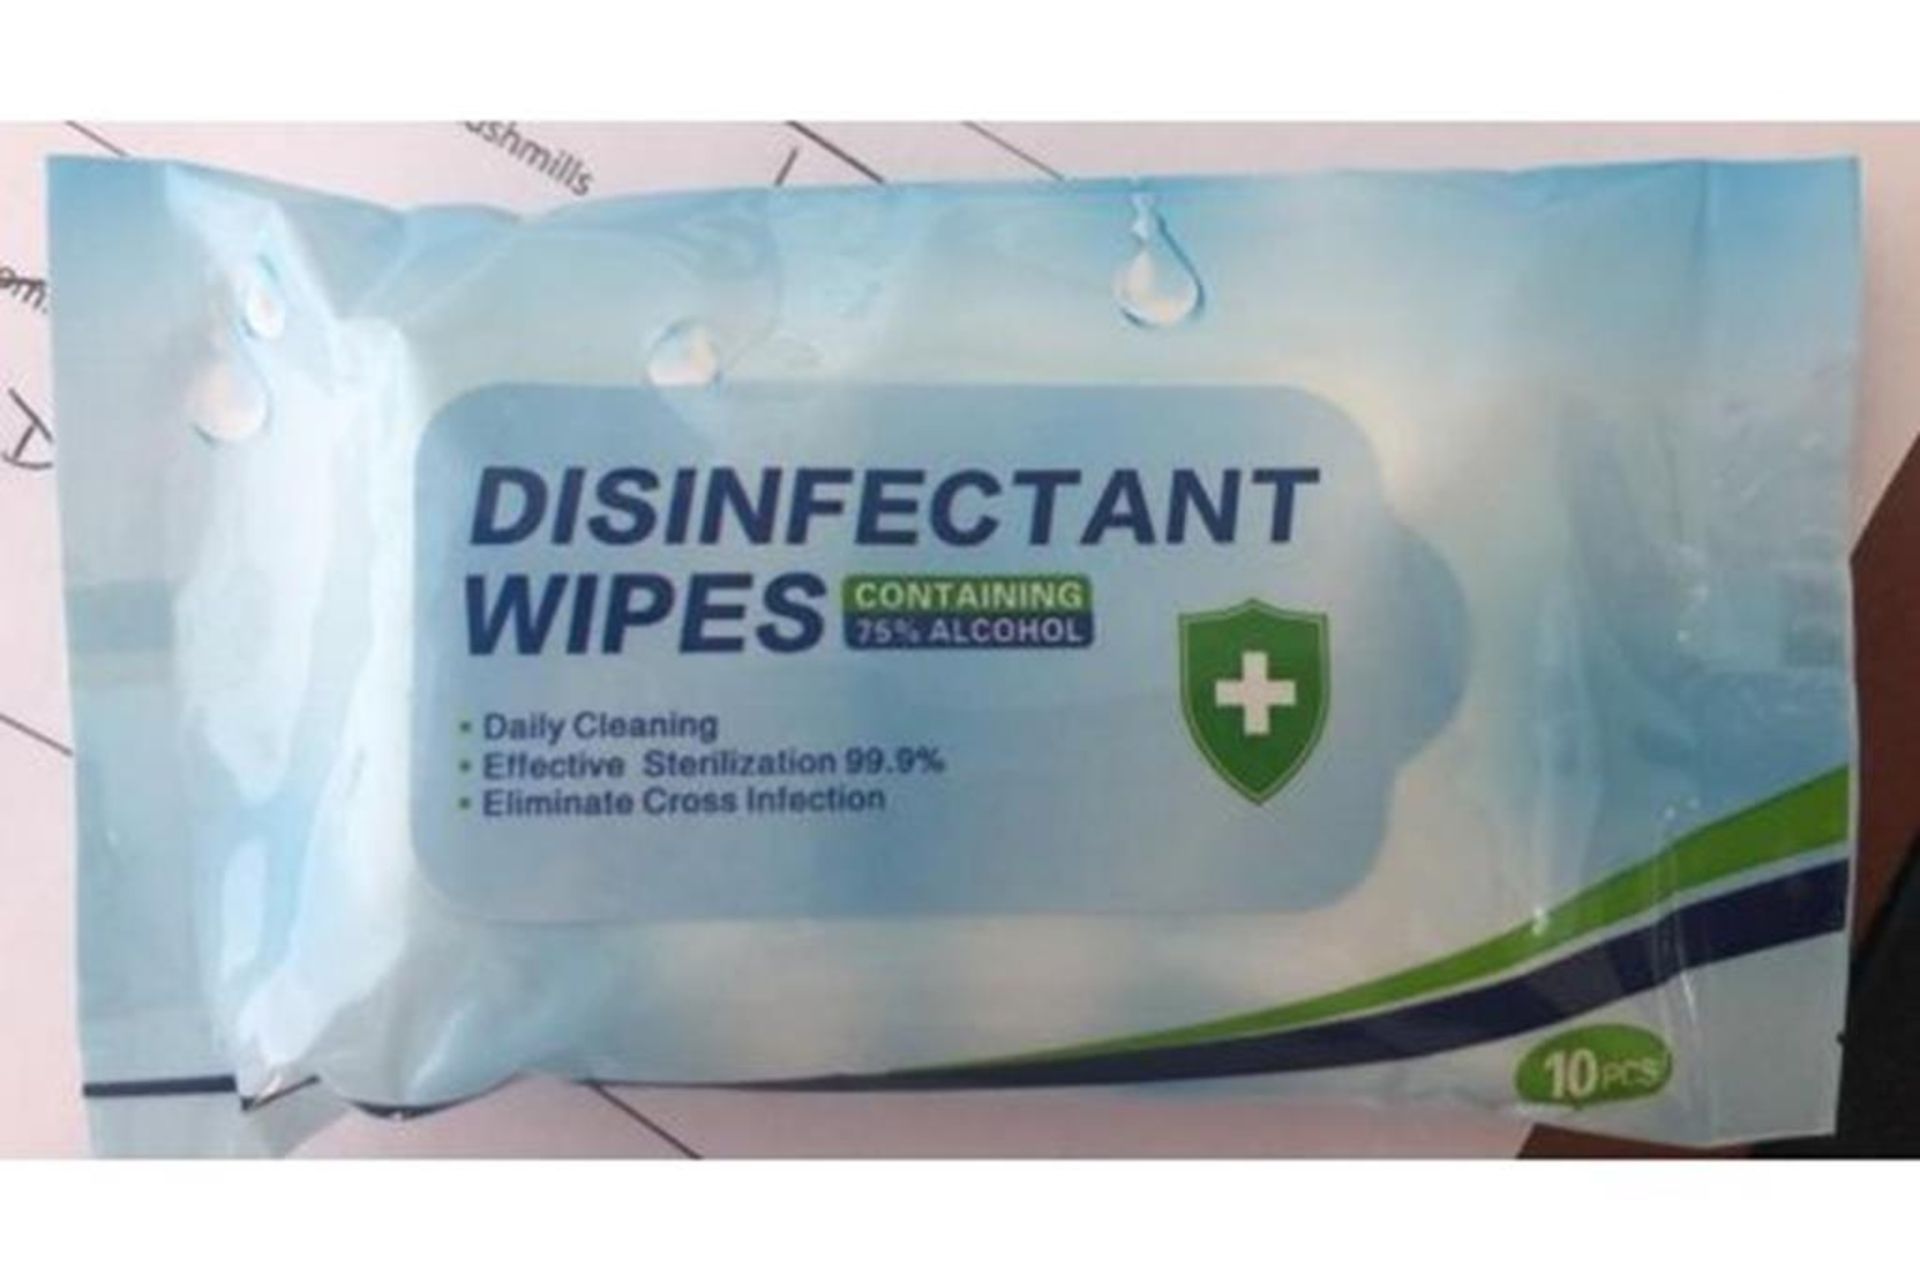 2500 Antibacterial Disinfectant Wipes (75% alcohol)